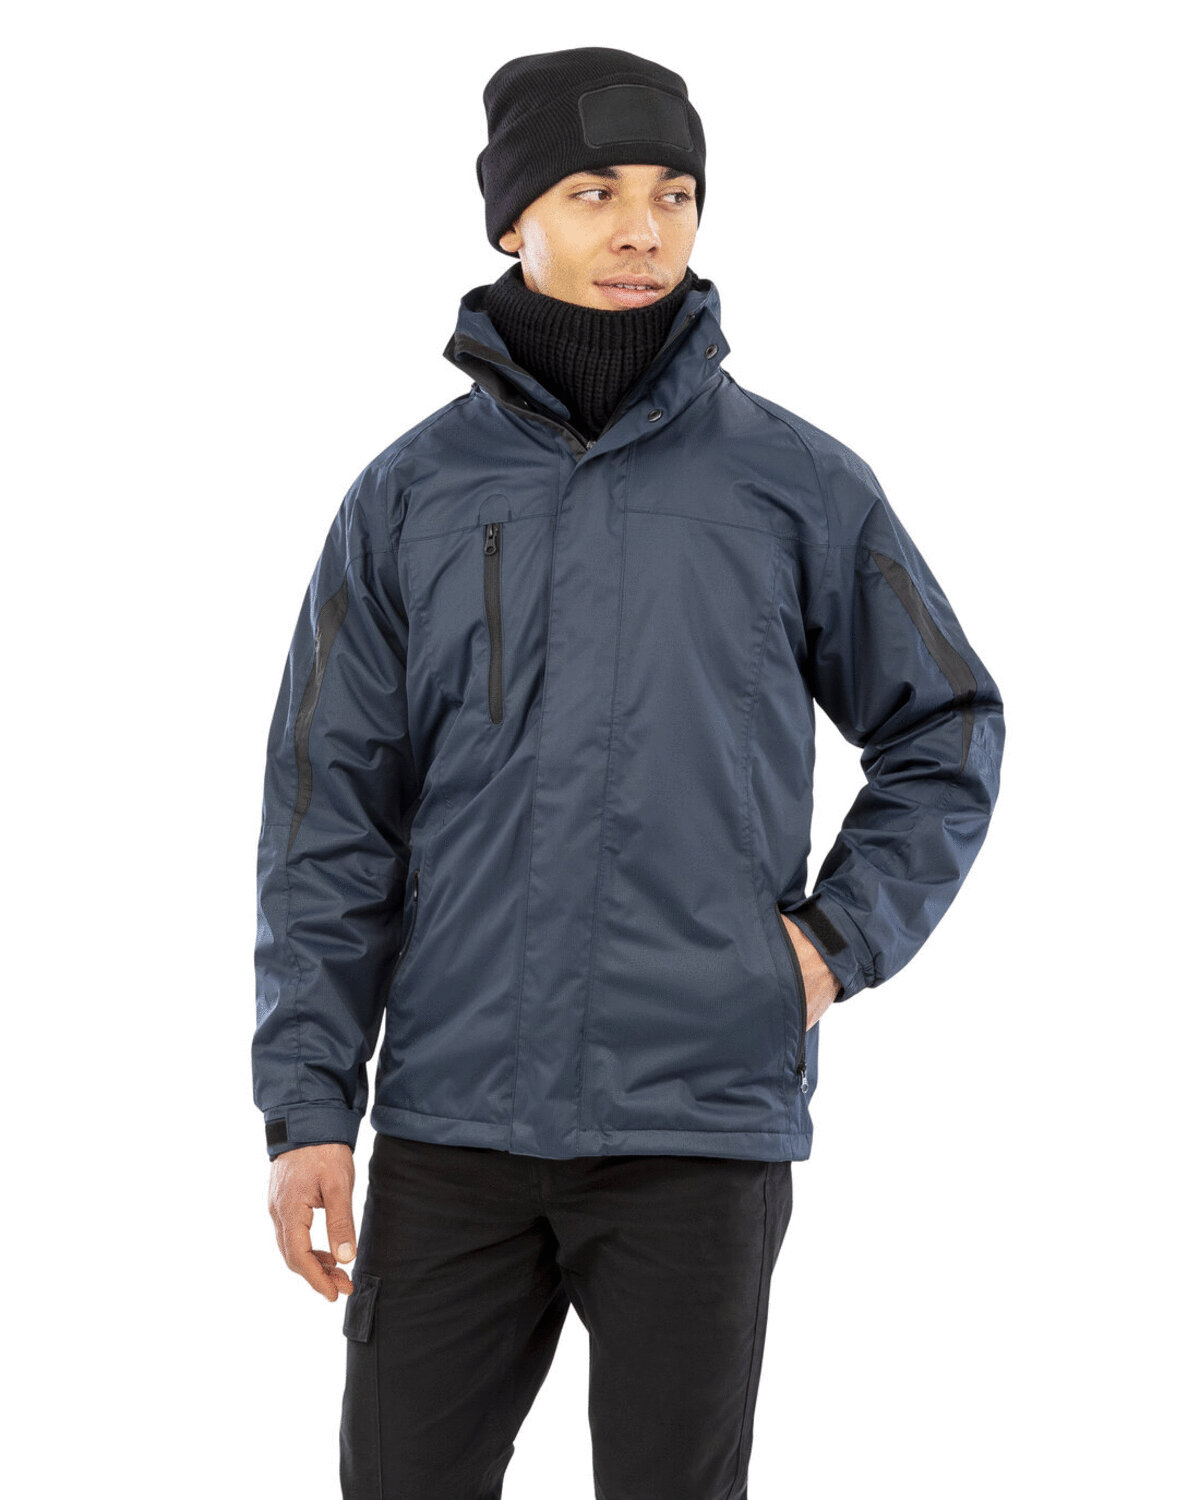 MENS 3 IN1 JOURNEY JACKET WITH SOFTSHELL INNER